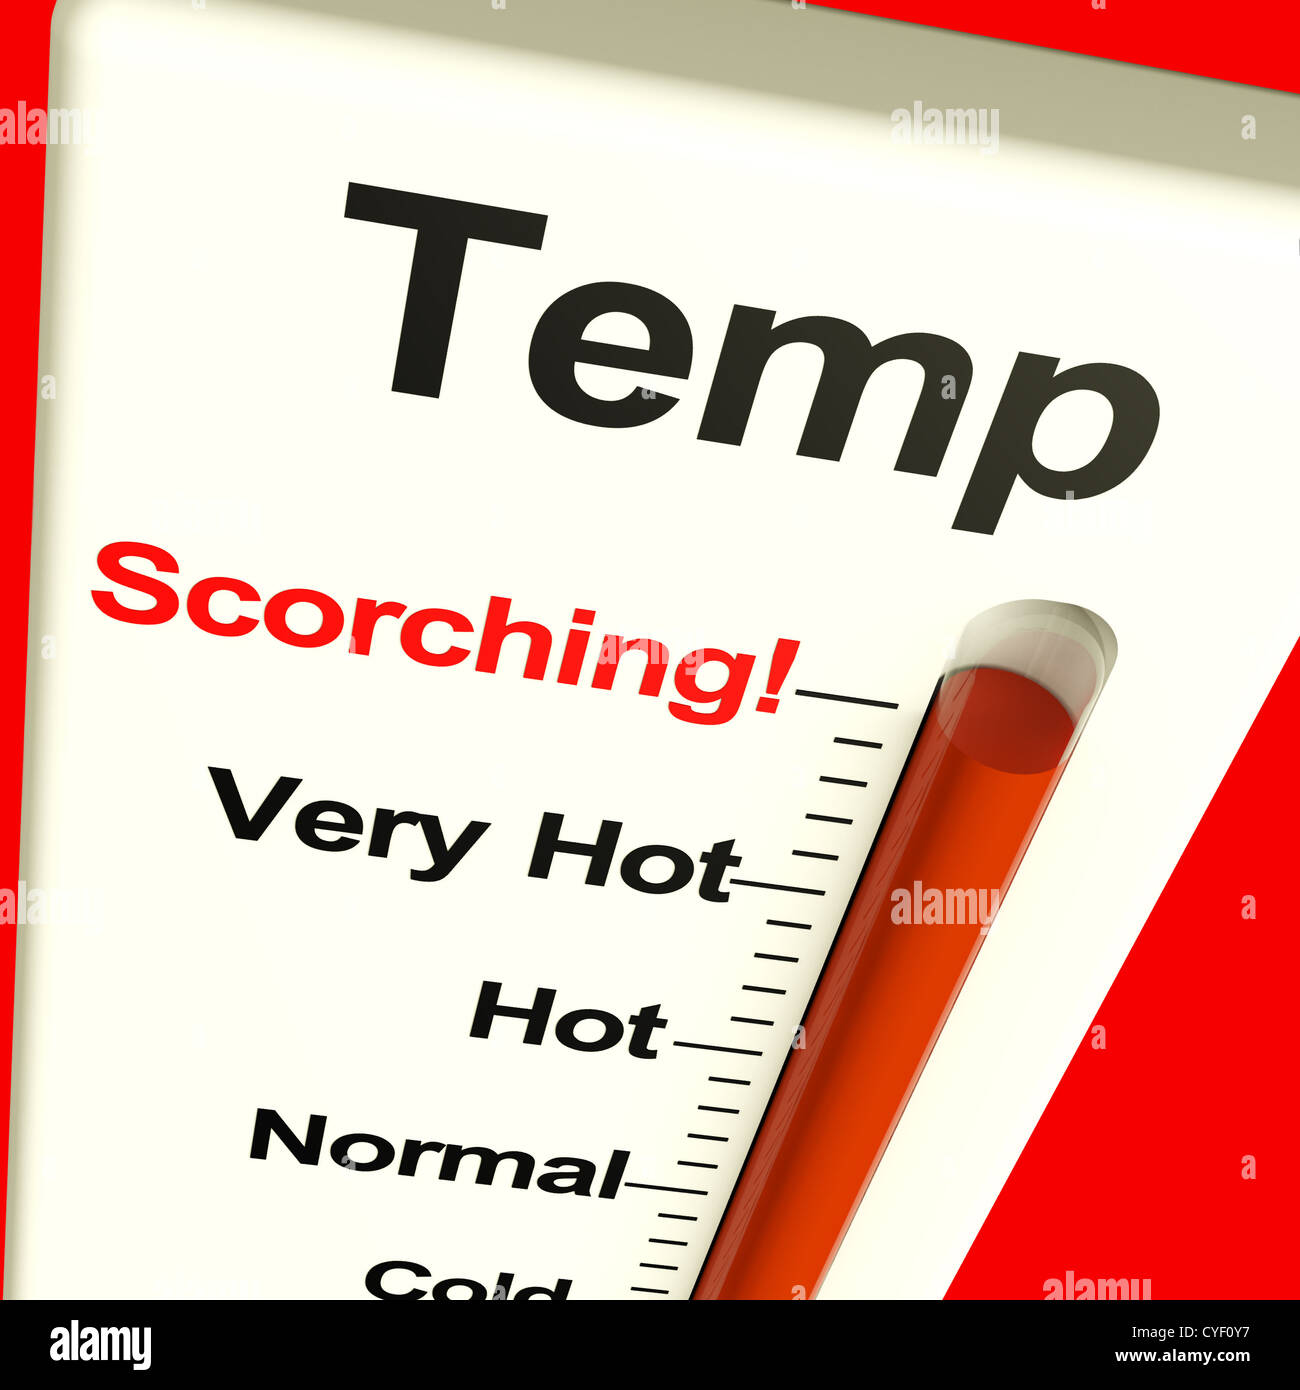 Very High Scorching Temperature Shown On A Big Thermostat Stock Photo